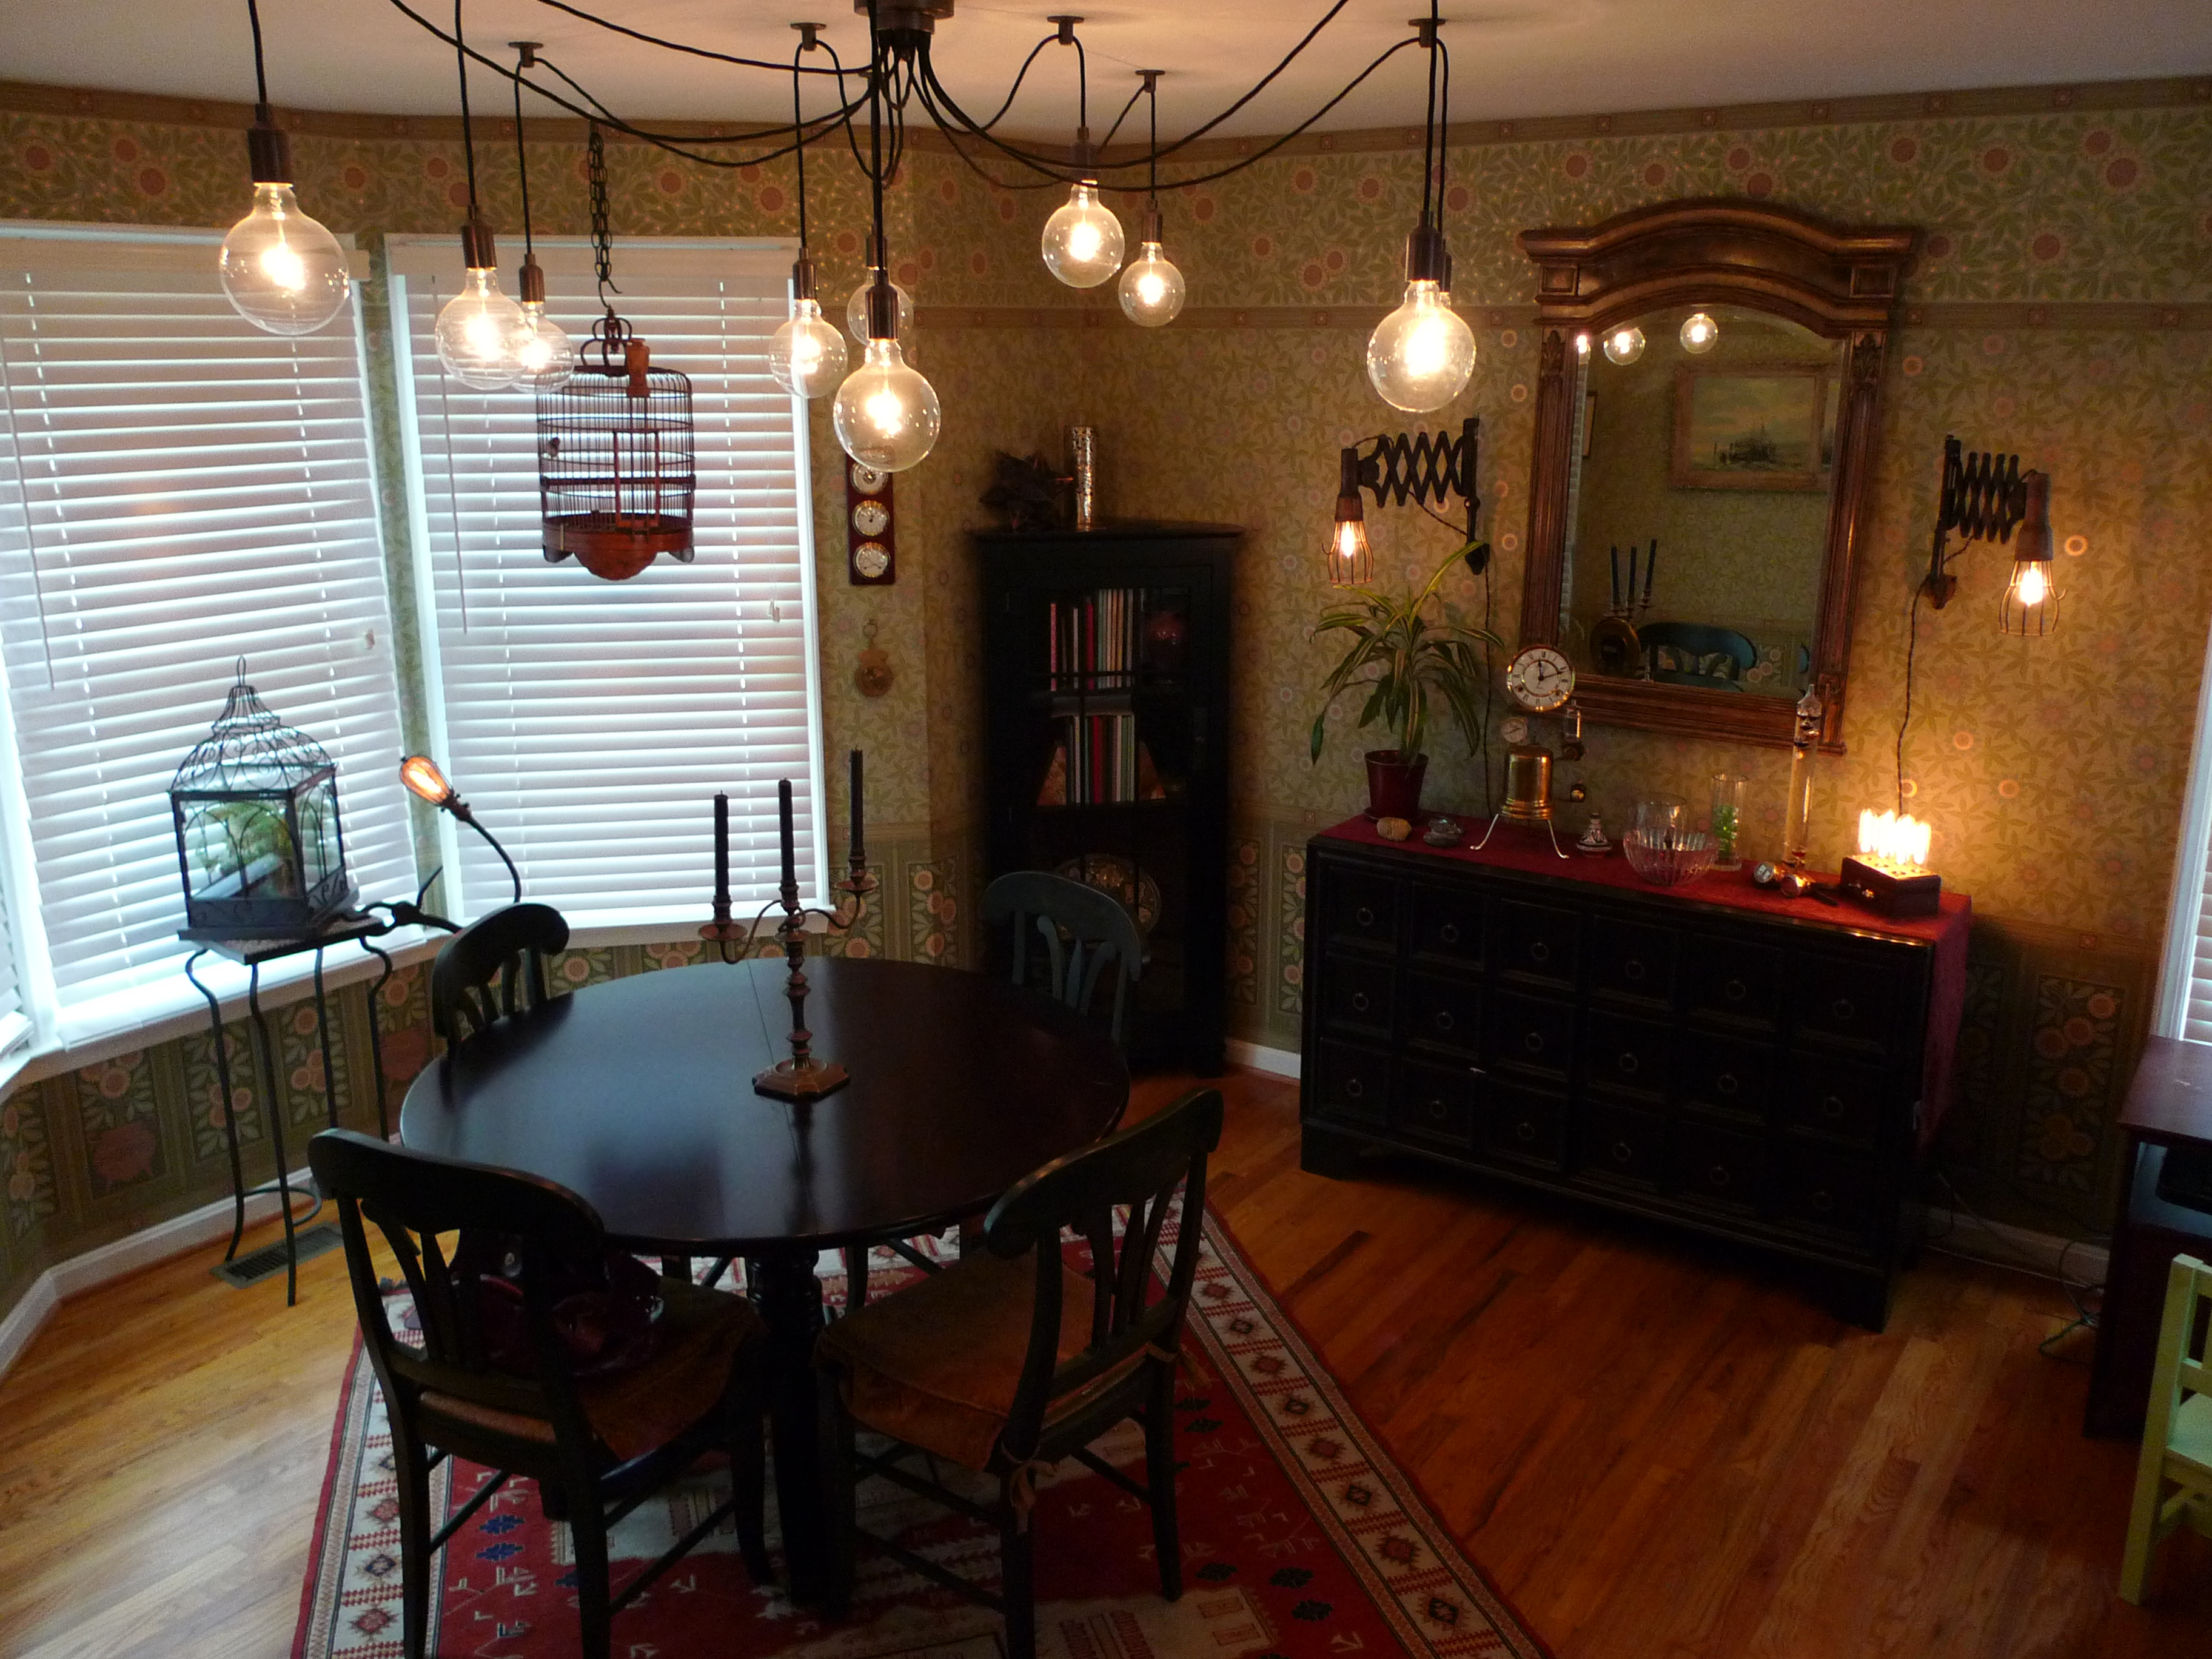 Designing our steampunk dining room